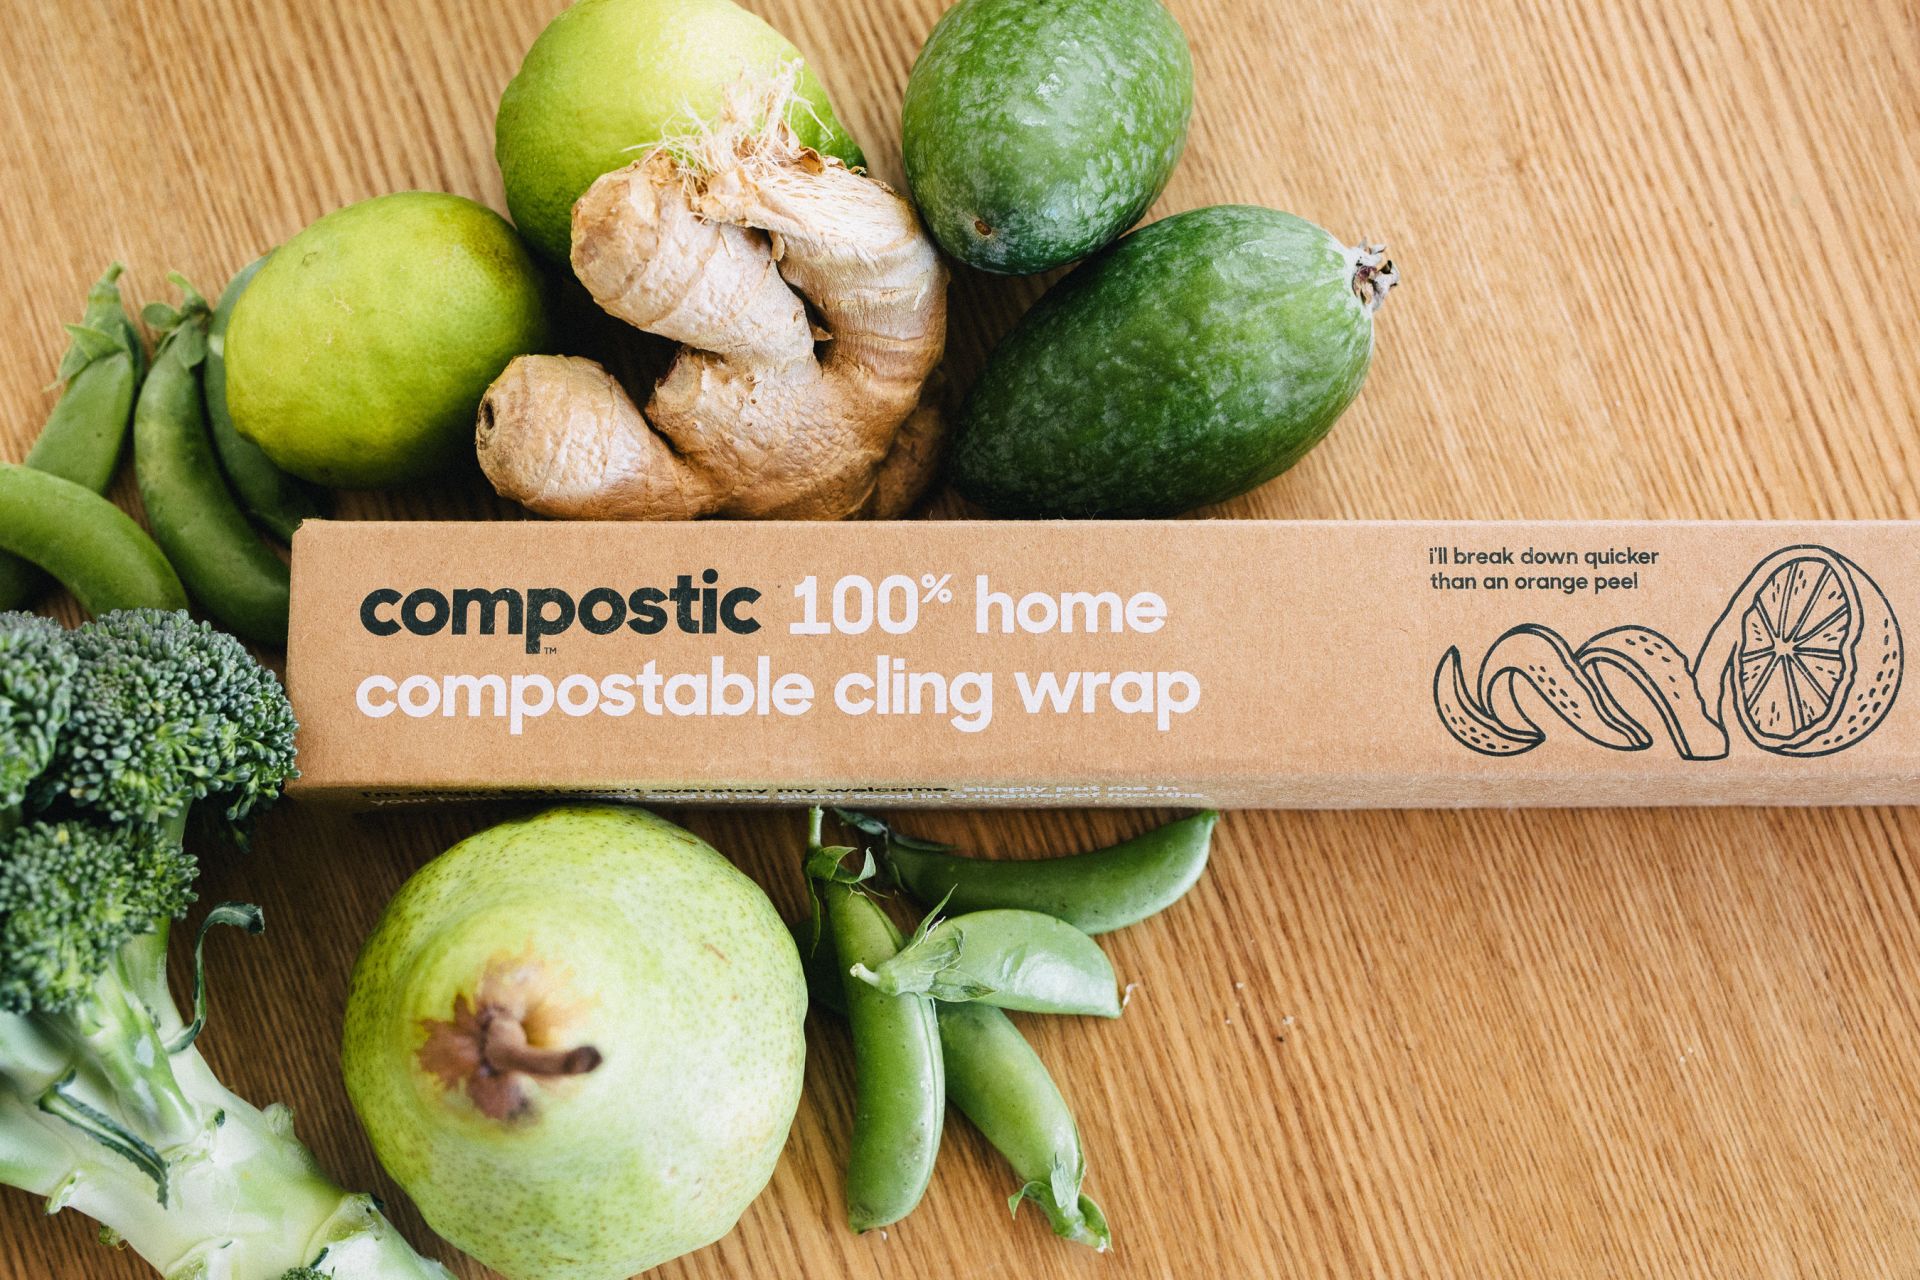 Compostic launches home-compostable plastic products in US